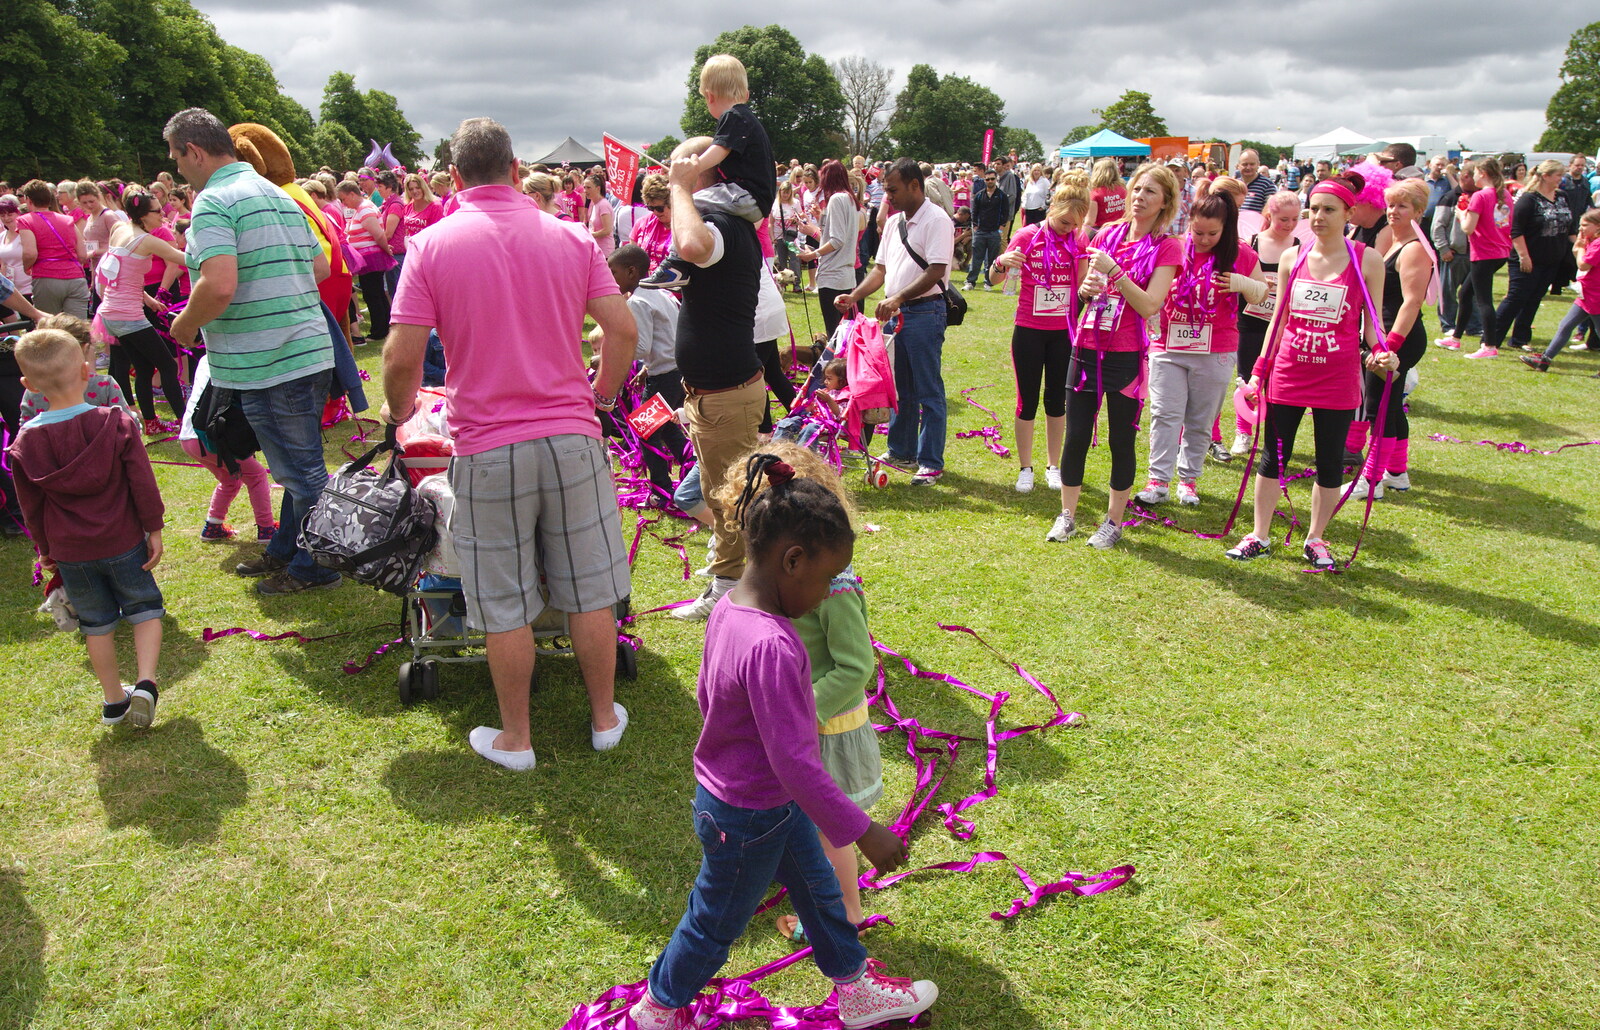 Milling throngs from Isobel's Race For Life, Chantry Park, Ipswich - 11th June 2014